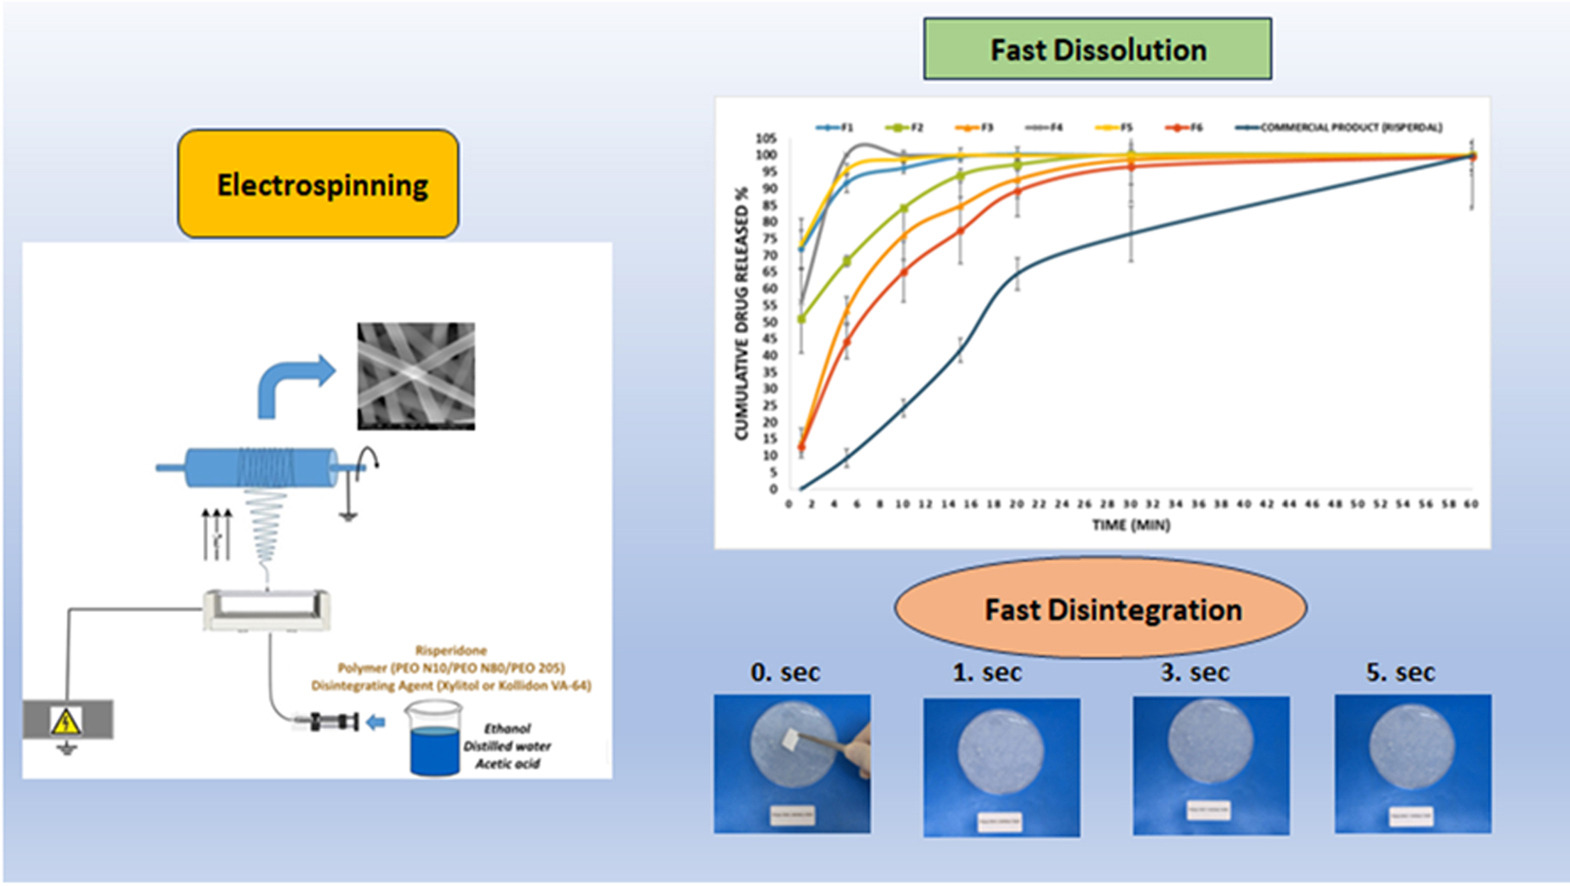 Oral fast-dissolving risperidone loaded electrospun nanofiber drug delivery systems for antipsychotic therapy